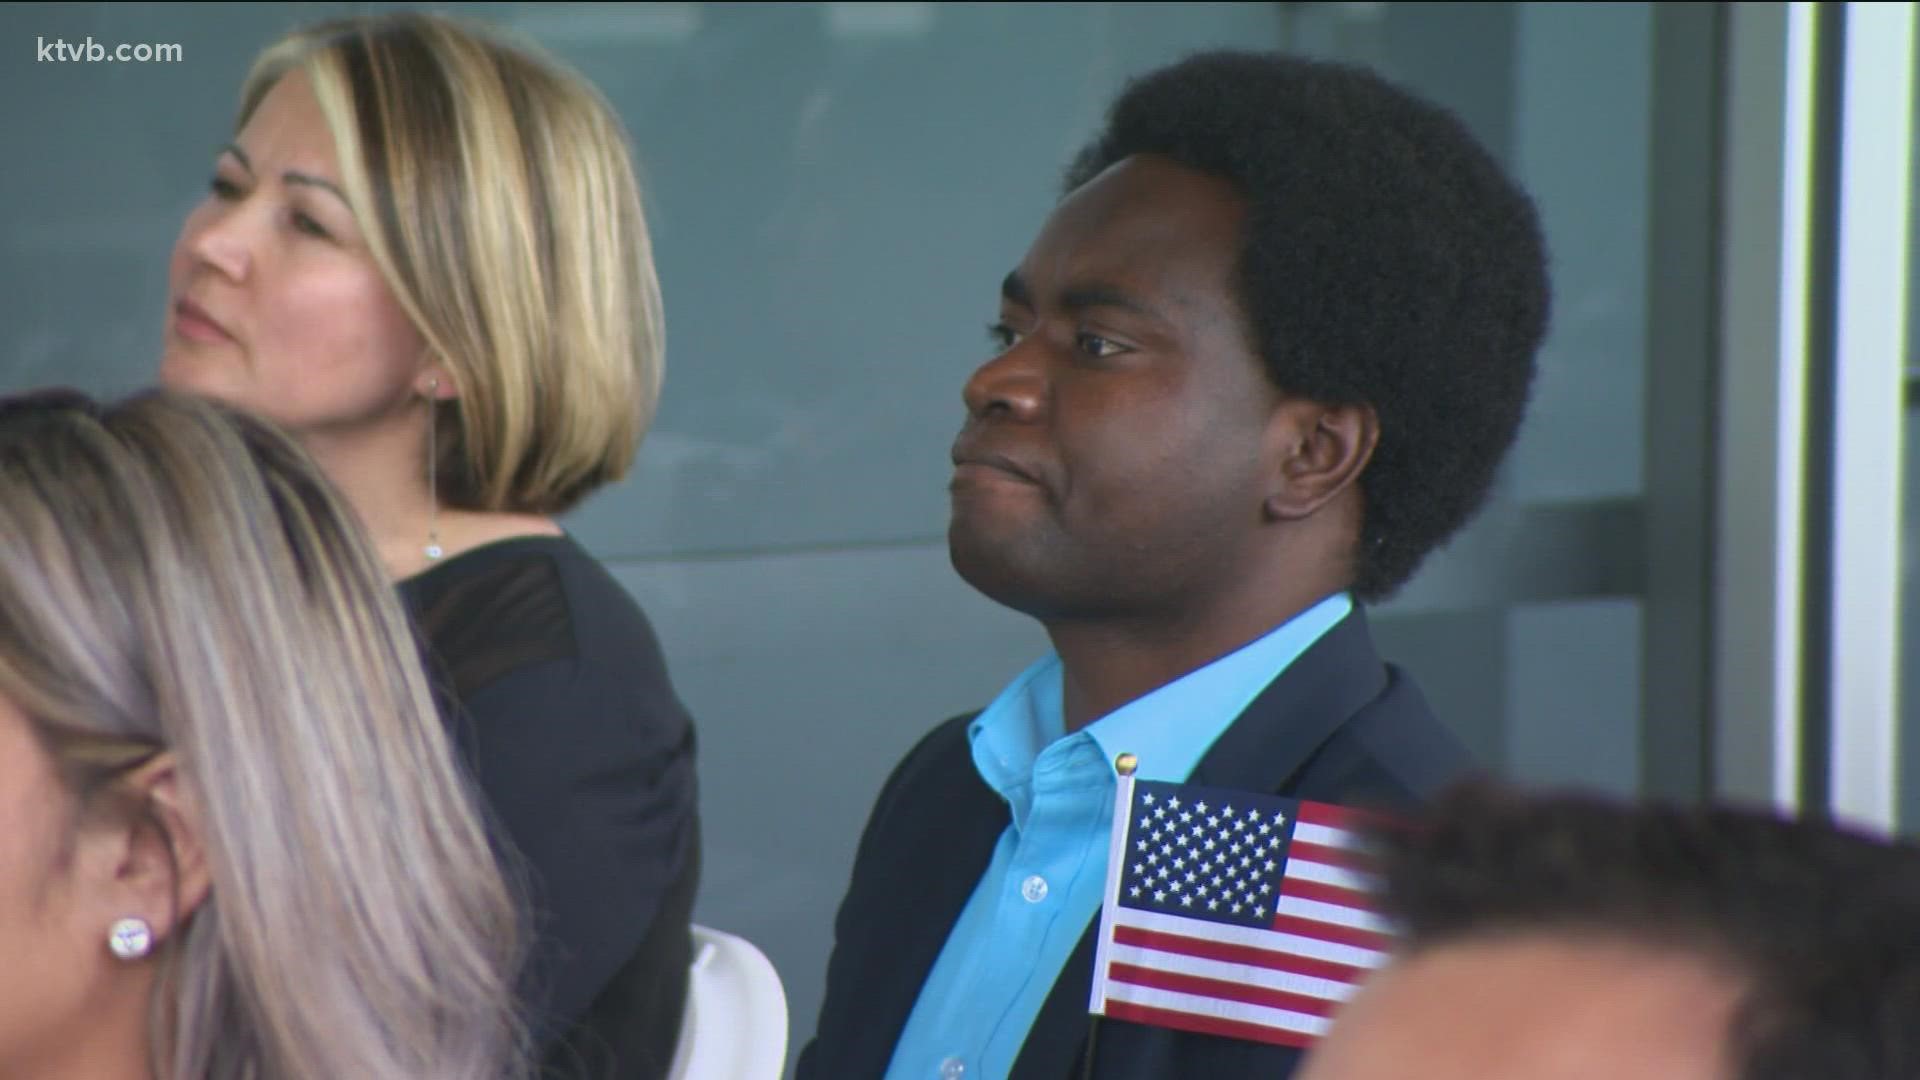 The new Americans were welcomed at the Federal Courthouse in Boise, cheered on by family, friends and supporters.